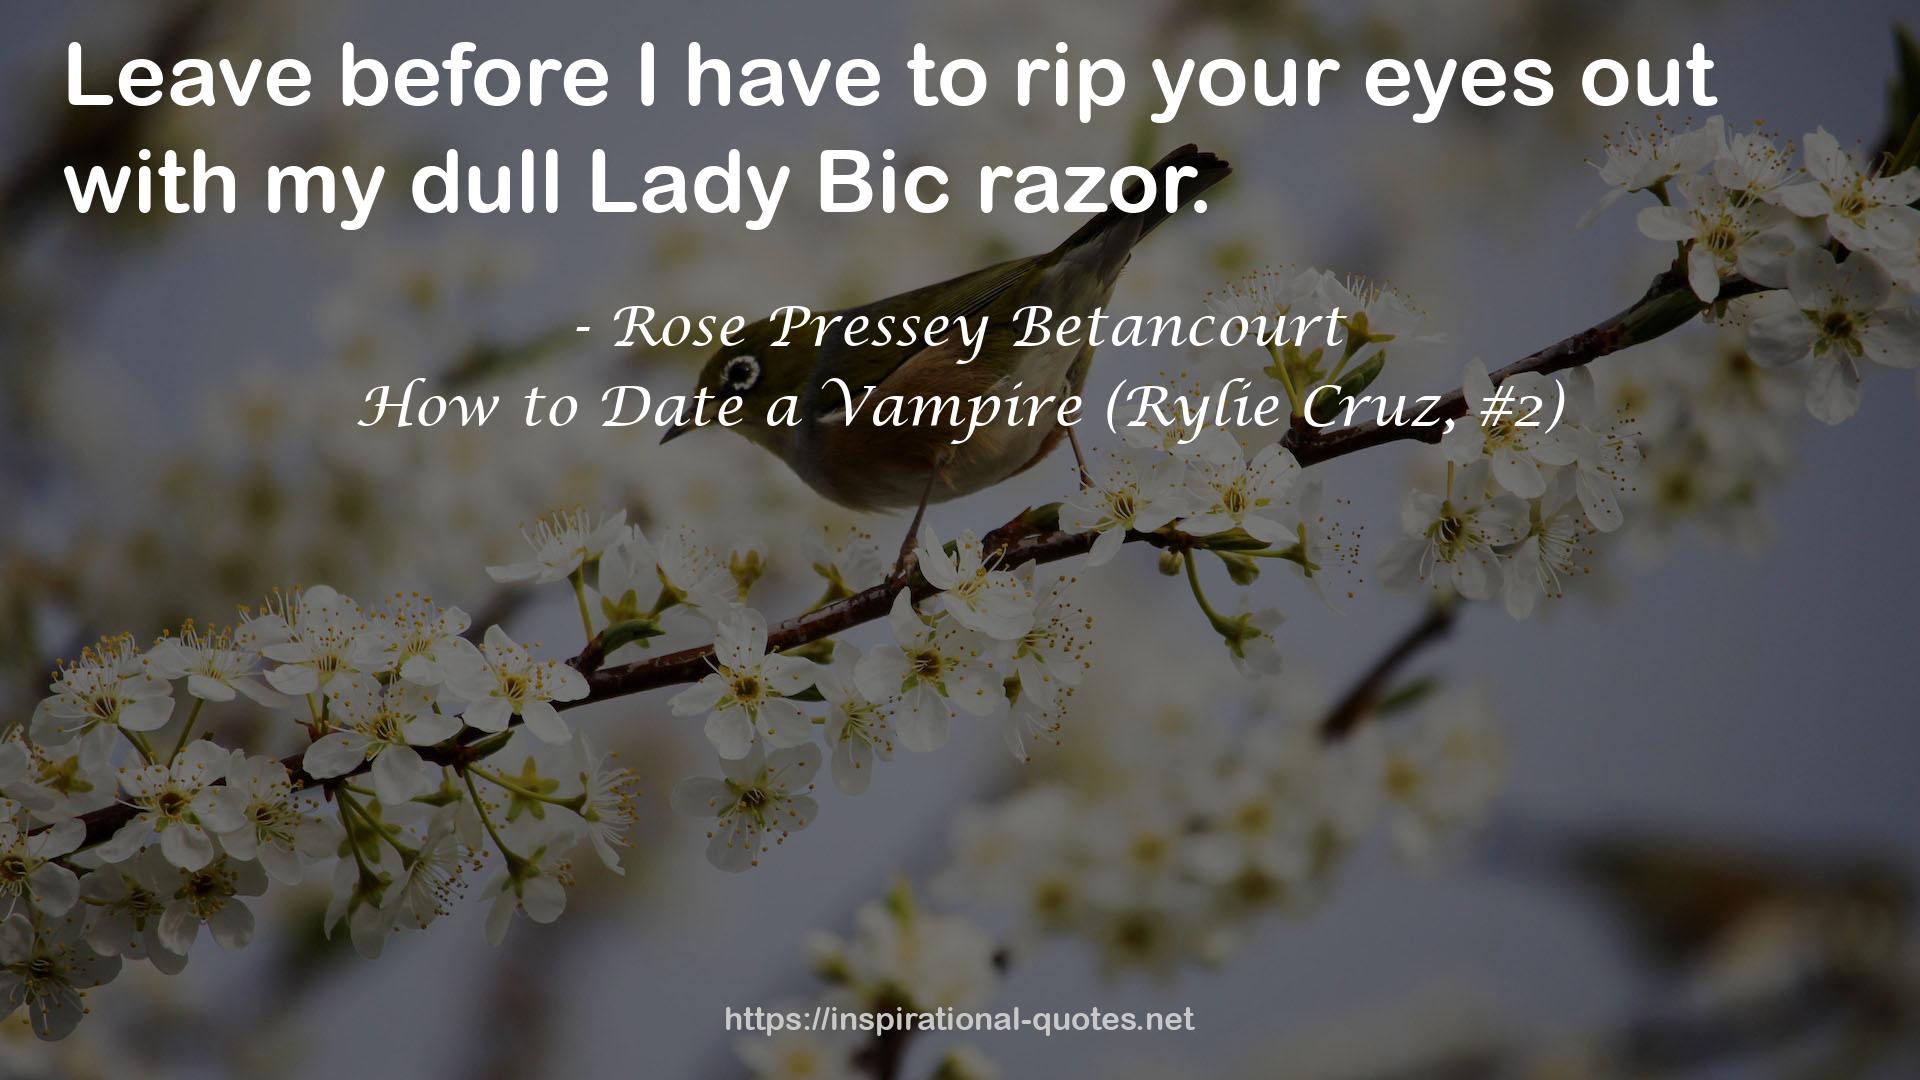 How to Date a Vampire (Rylie Cruz, #2) QUOTES